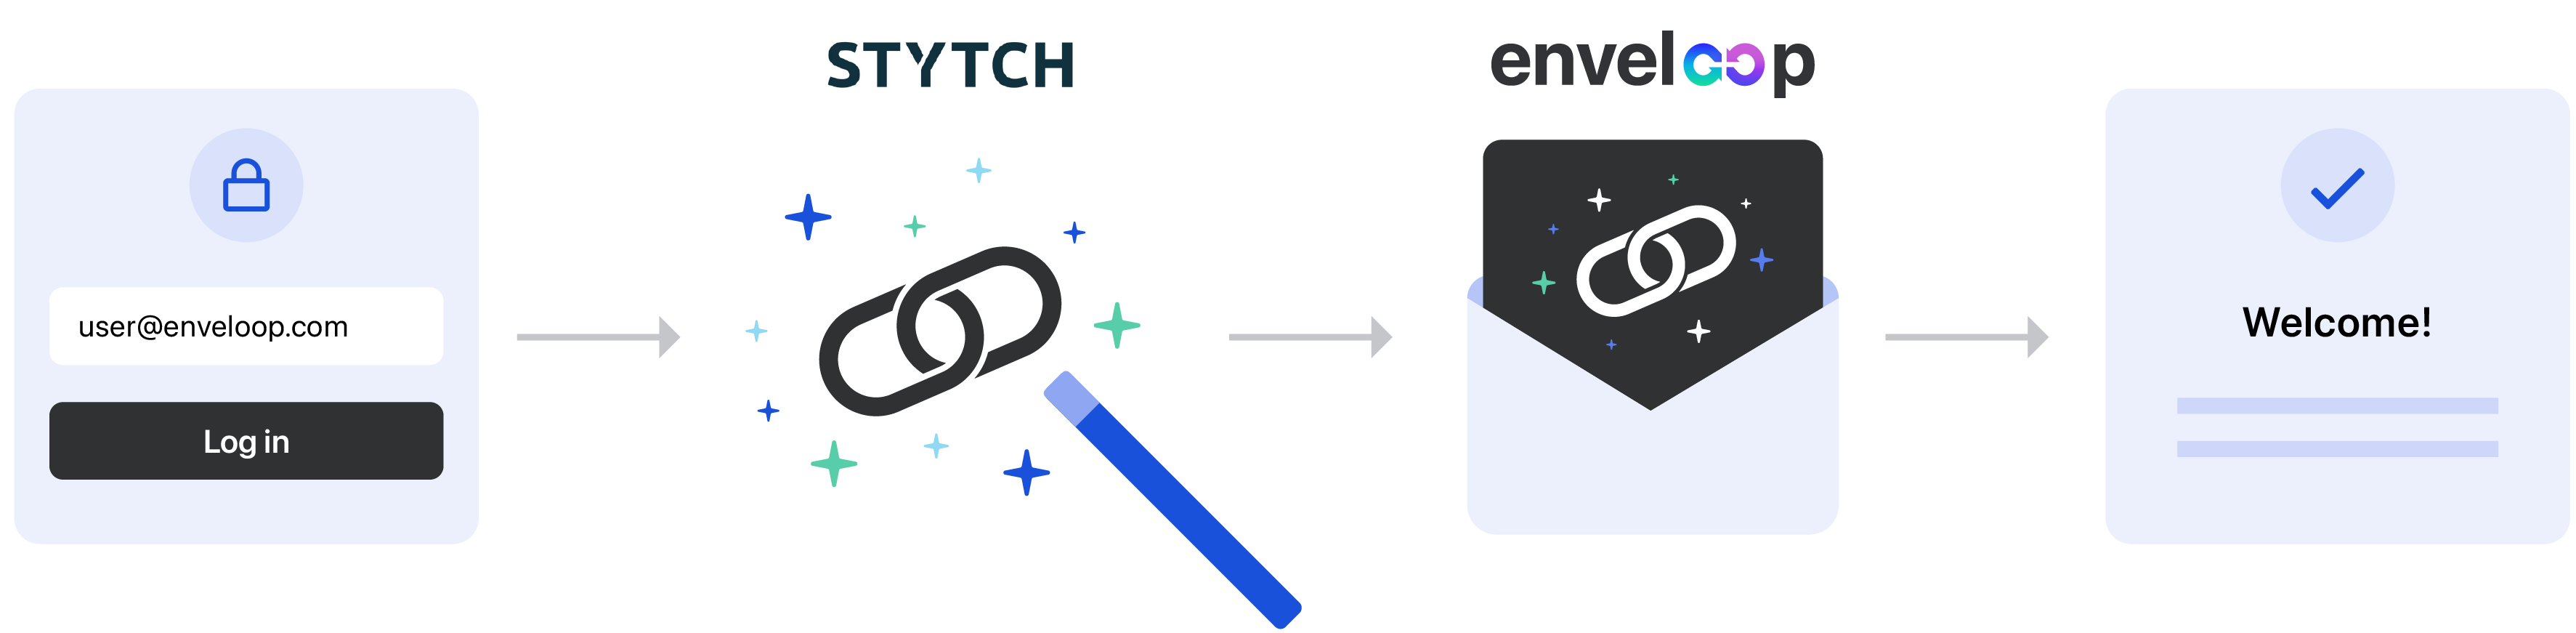 Level Up Your Messaging Game: Send Engaging Auth Emails with Stytch and Enveloop